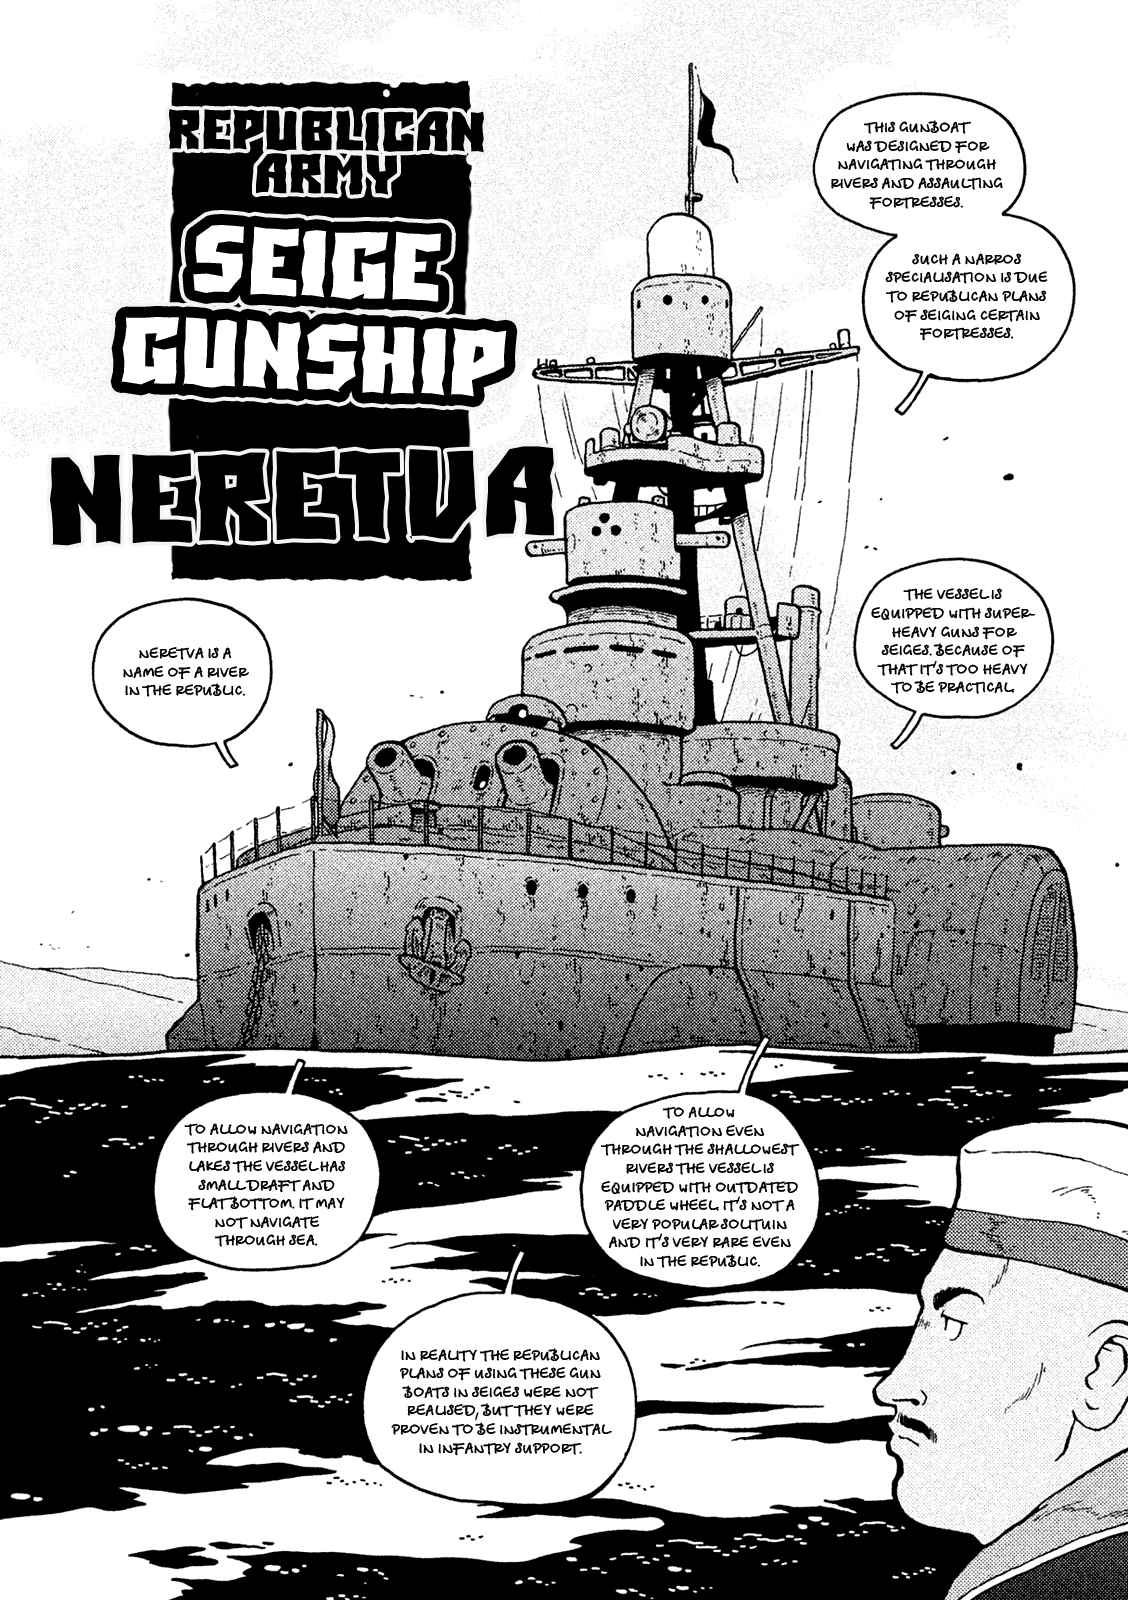 Guns and Stamps Vol. 5 Ch. 41 Marshal's Thriving Business